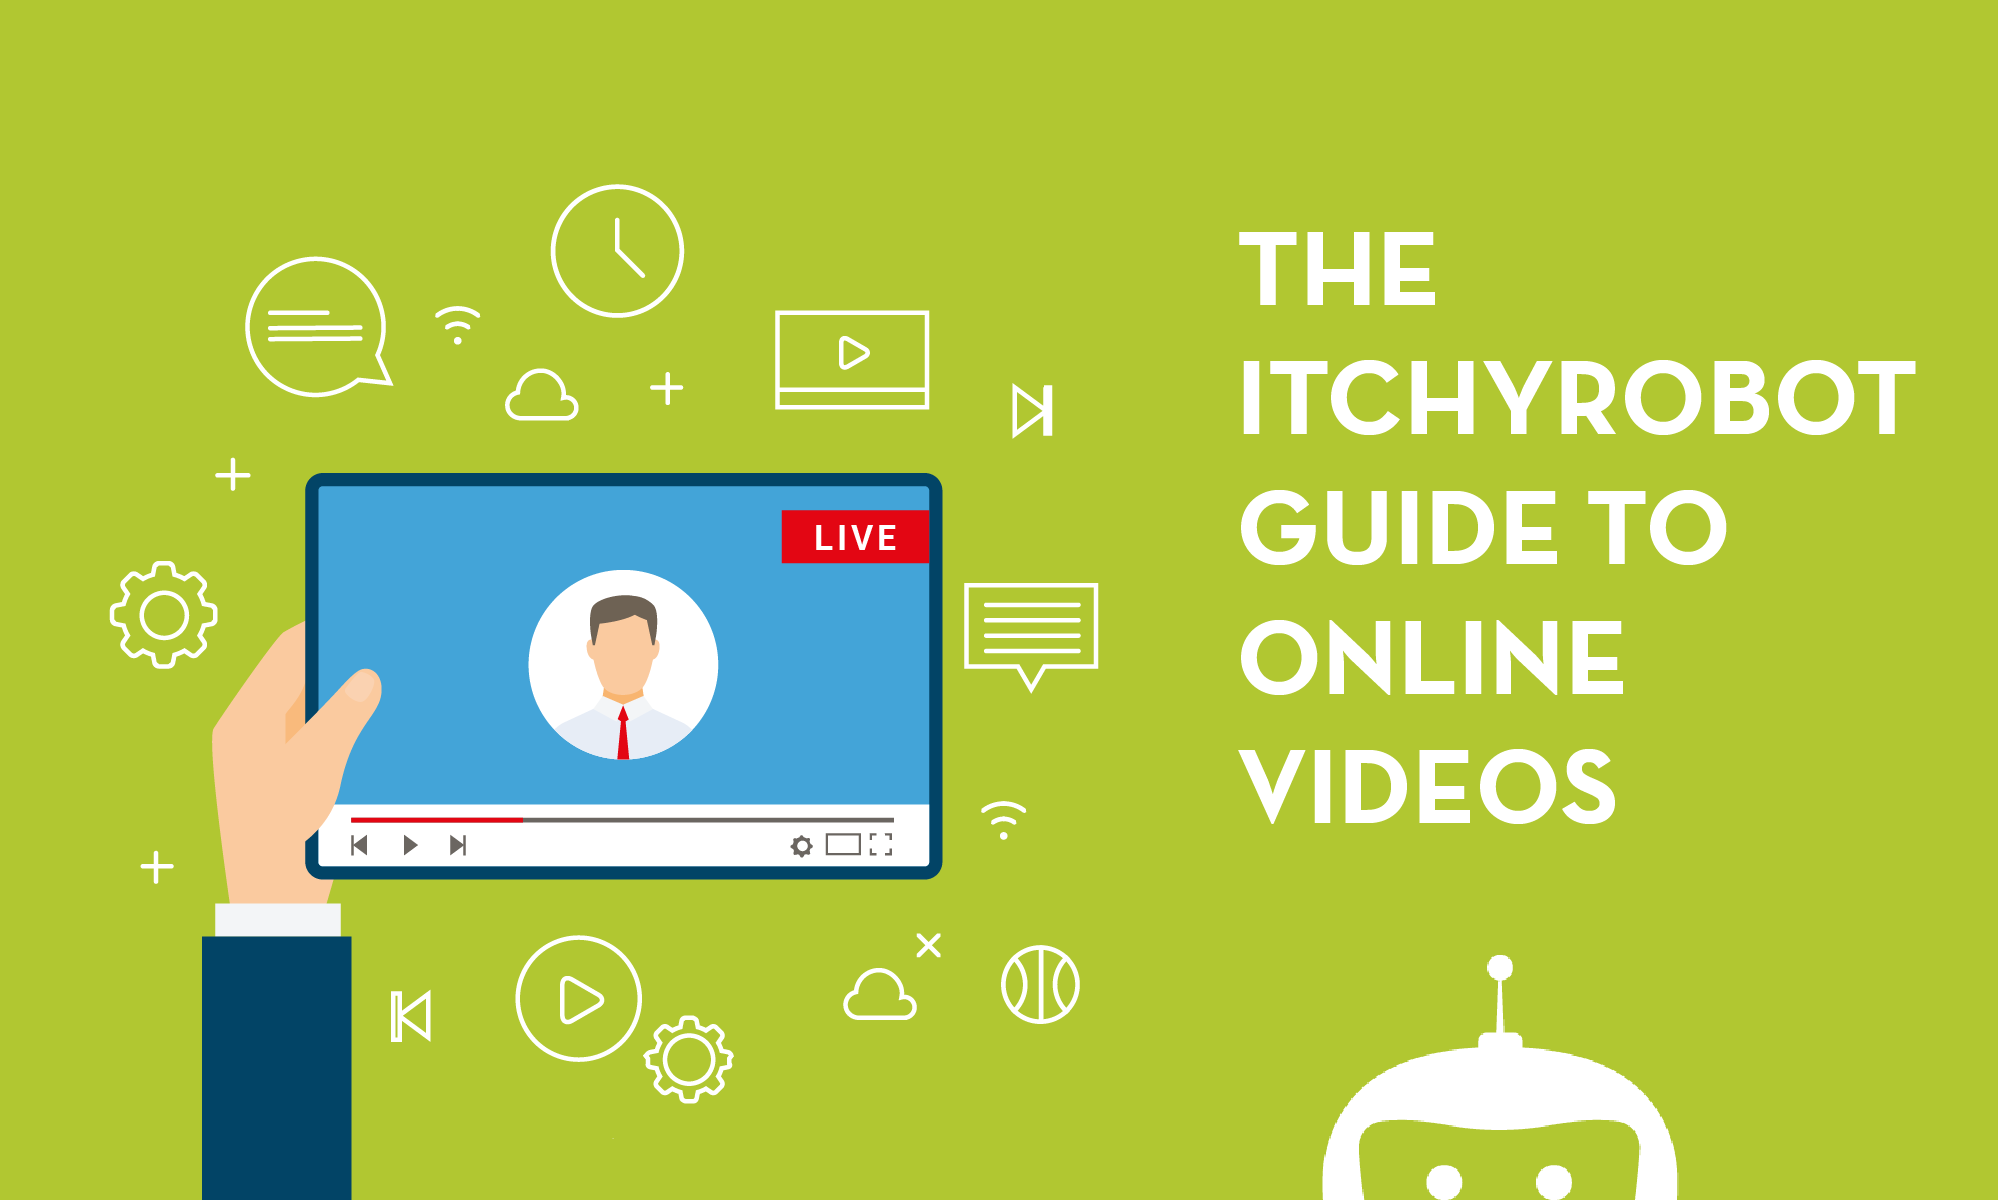 The iTCHYROBOT Guide to Videos